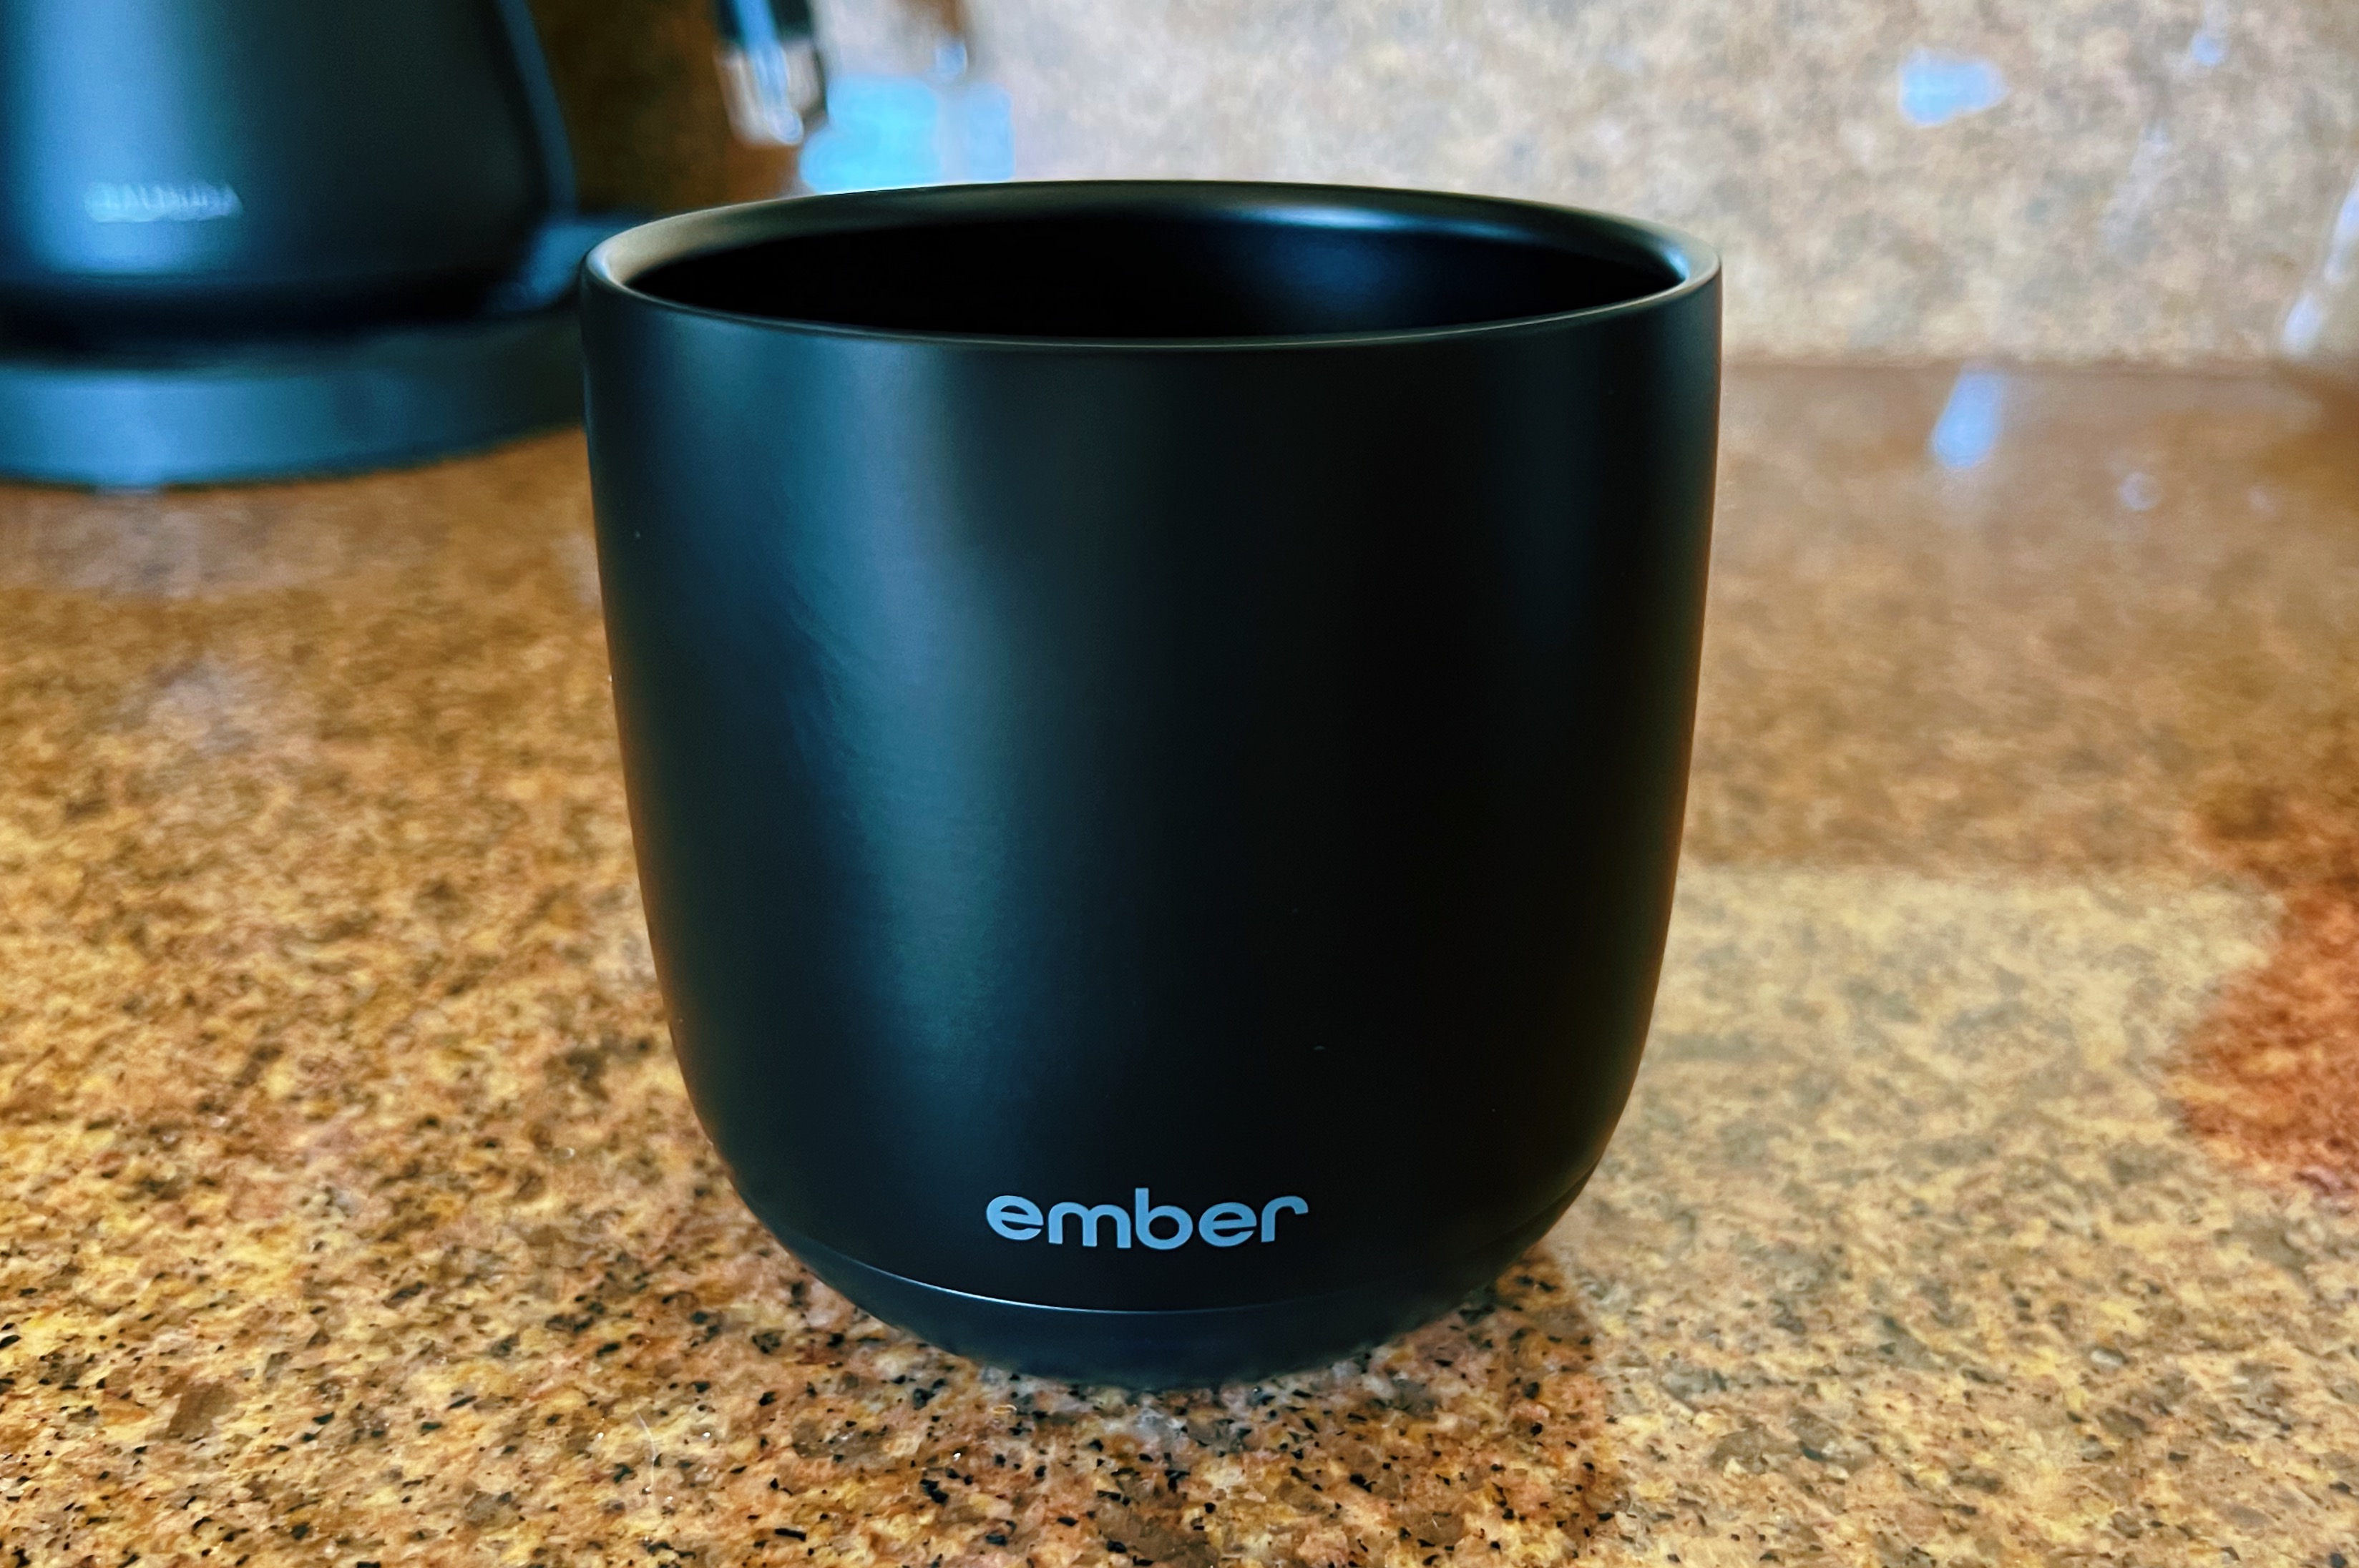 Ember 6-Ounce Coffee Cup Review: Who's This Heated Mug for?